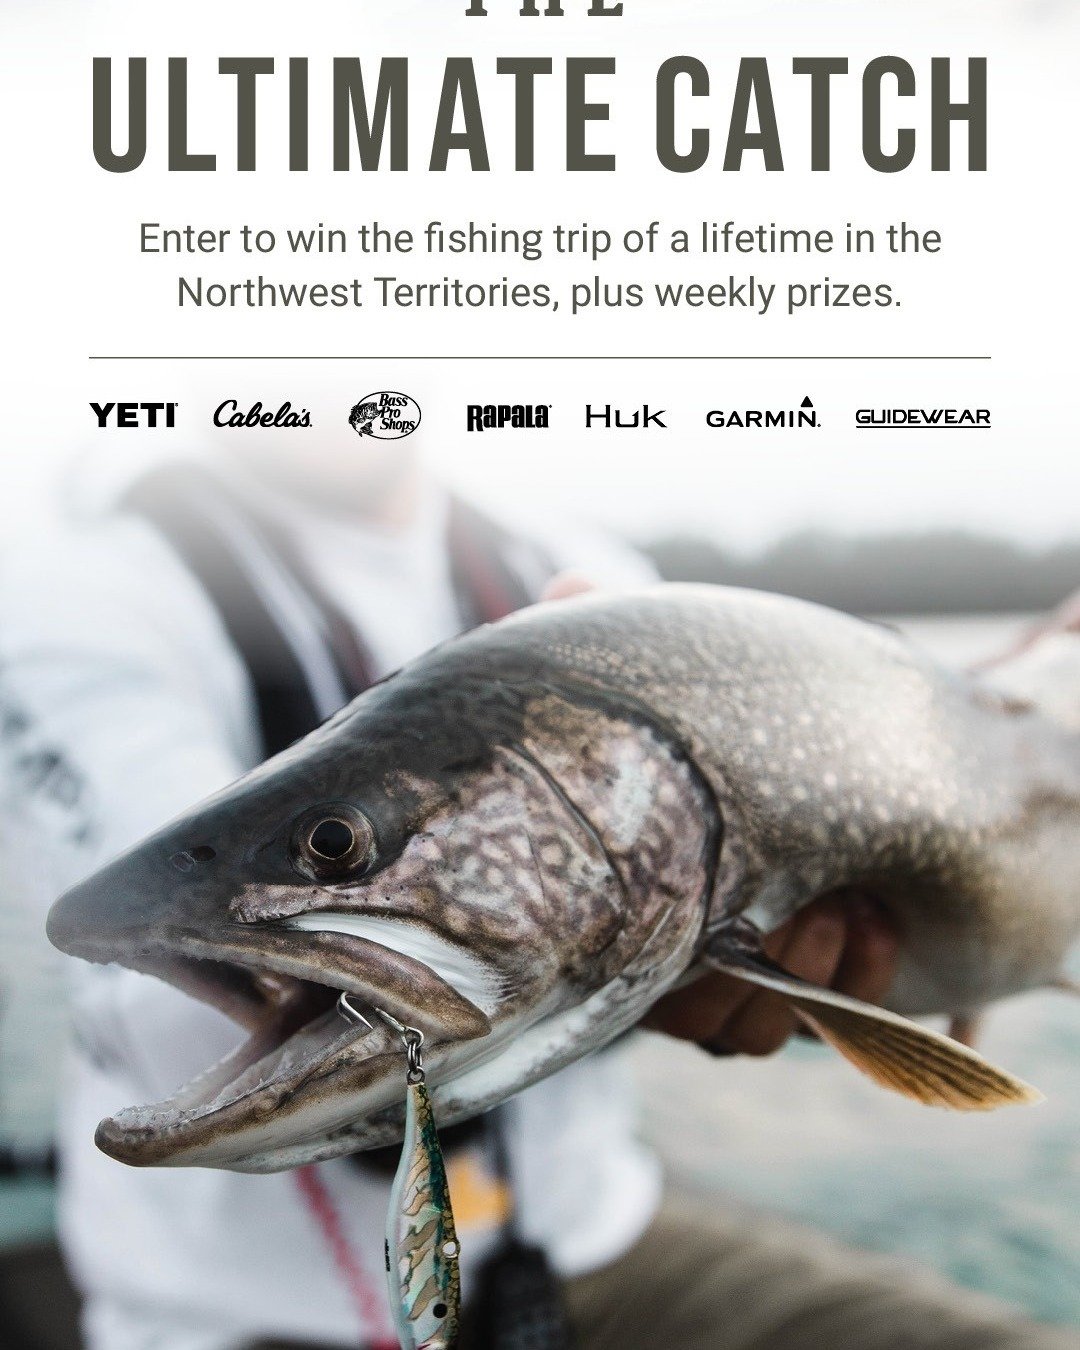 Two more days to enter The Ultimate Catch contest! Once in a lifetime trip and other great prizes! Enter now at cabelas.ca/pages/ultimatecatch